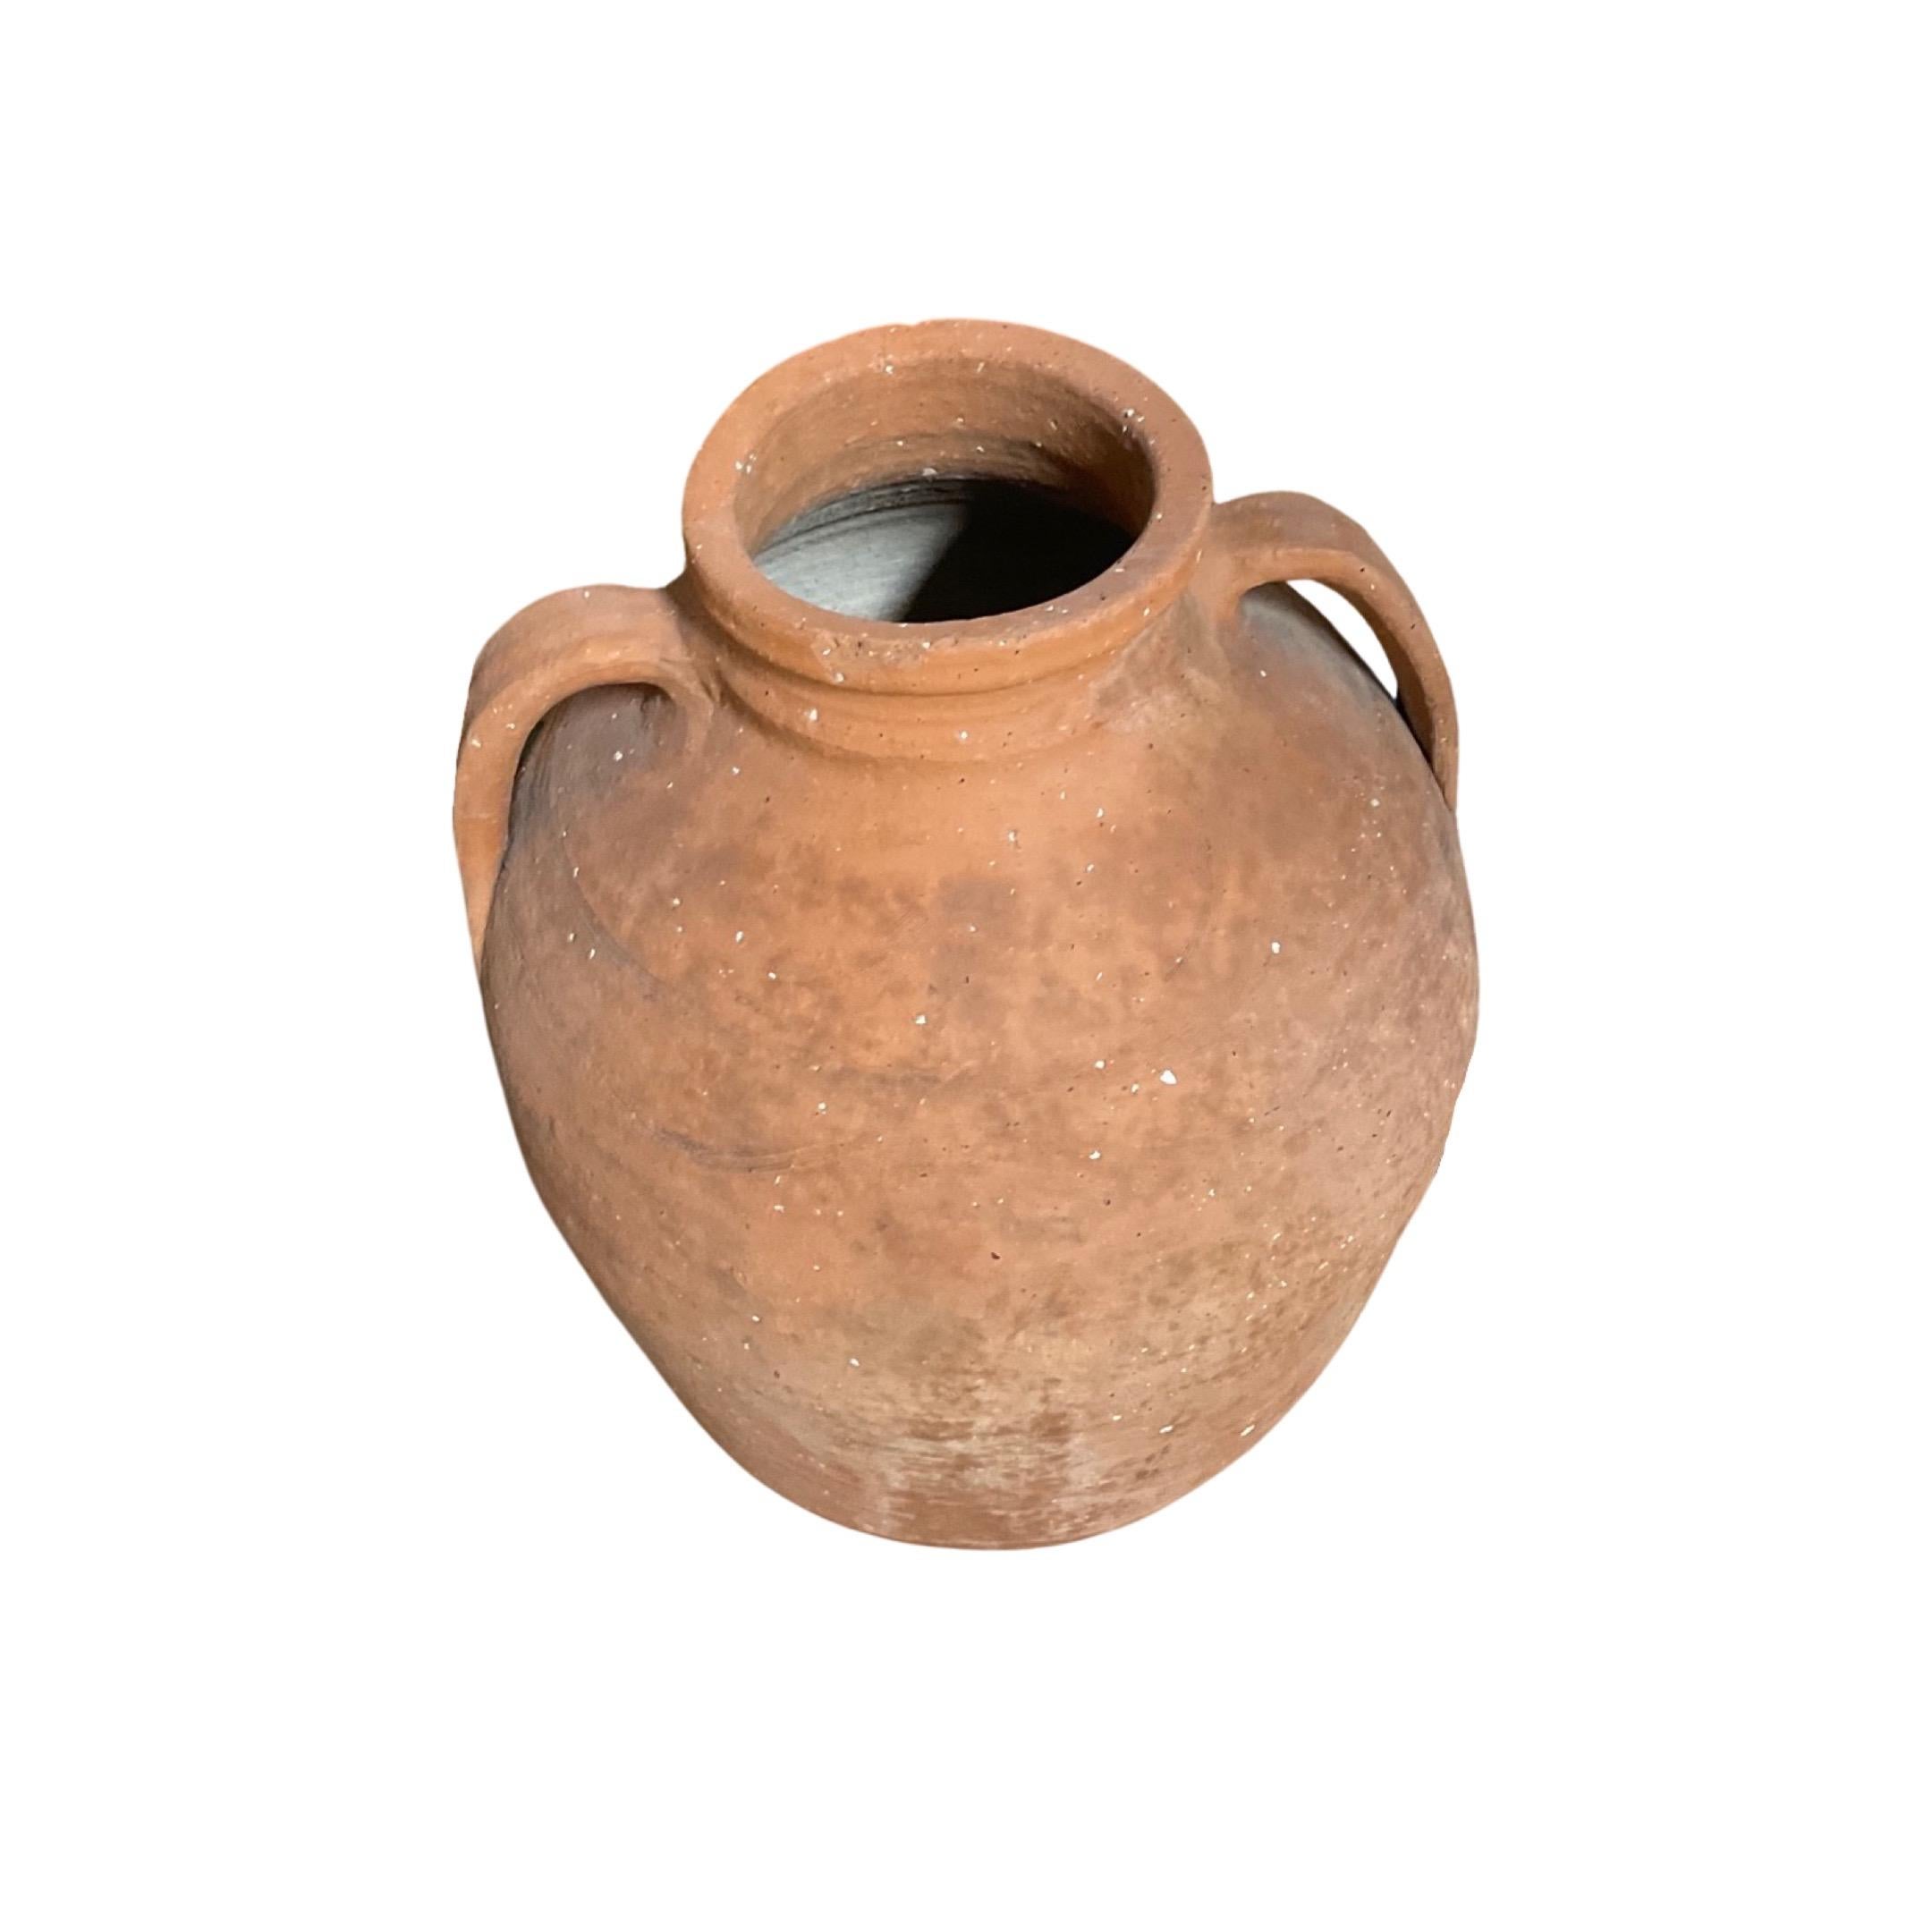 This unique Greek terracotta water vessel from the 18th century is perfect for adding a rustic and authentic decoration to your garden. It can be used for both functional and decorative purposes -as a water vessel, planter, or simply as ornamental